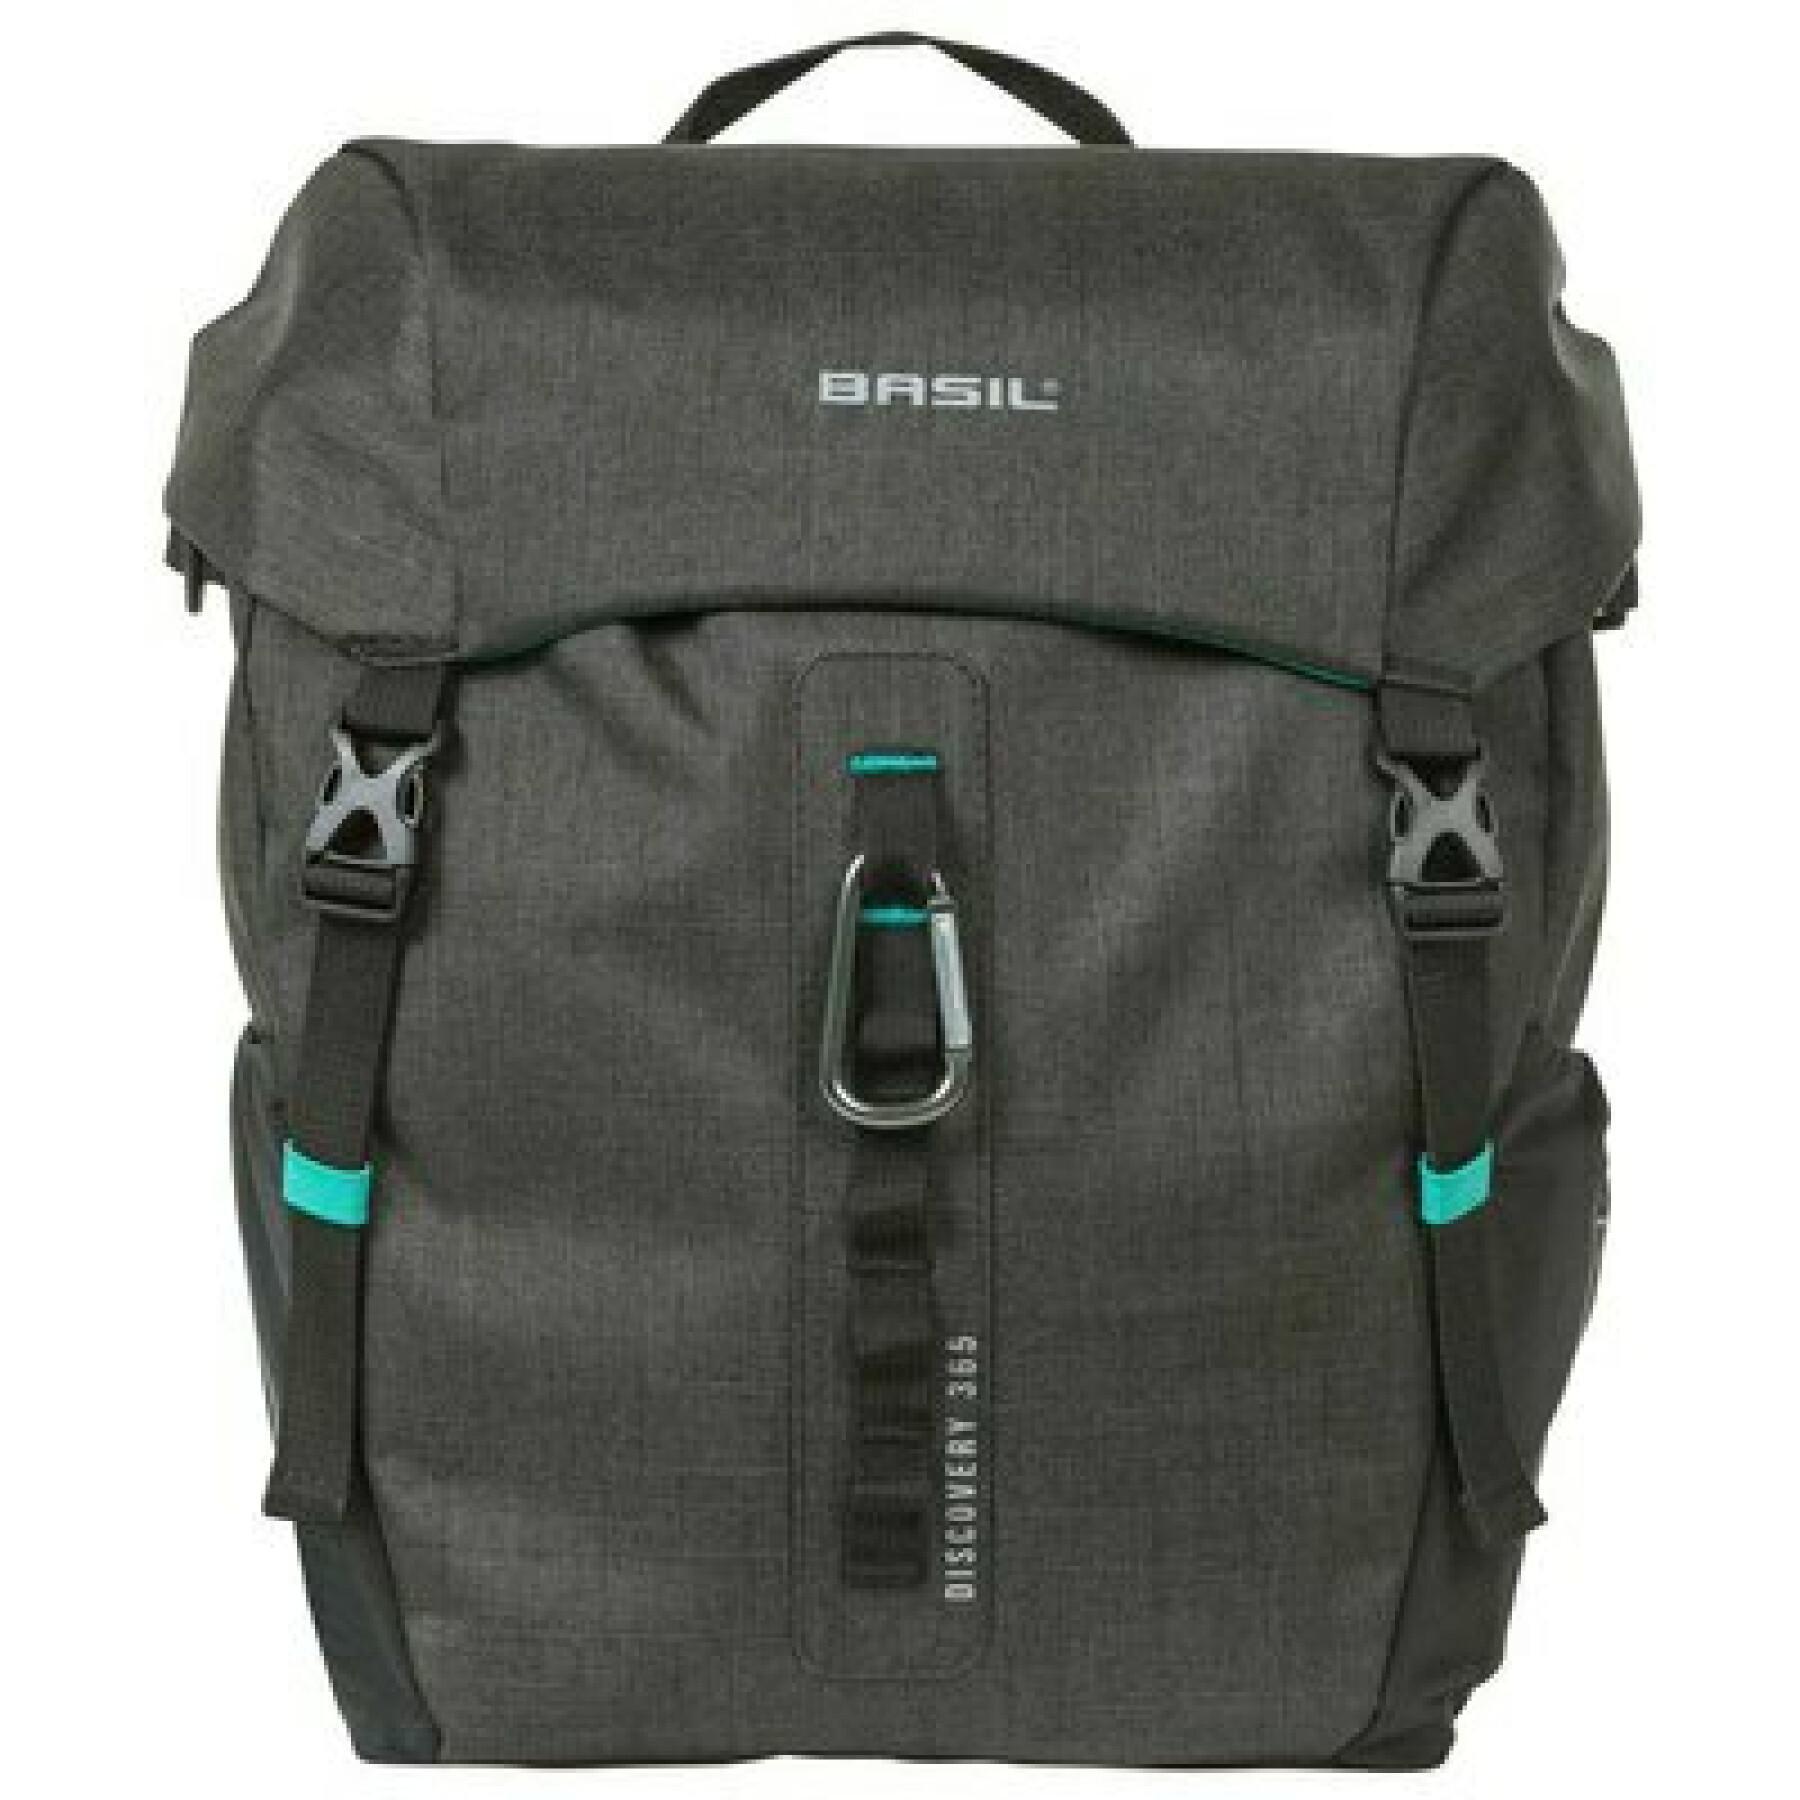 Bags Basil discovery 365ds 9L